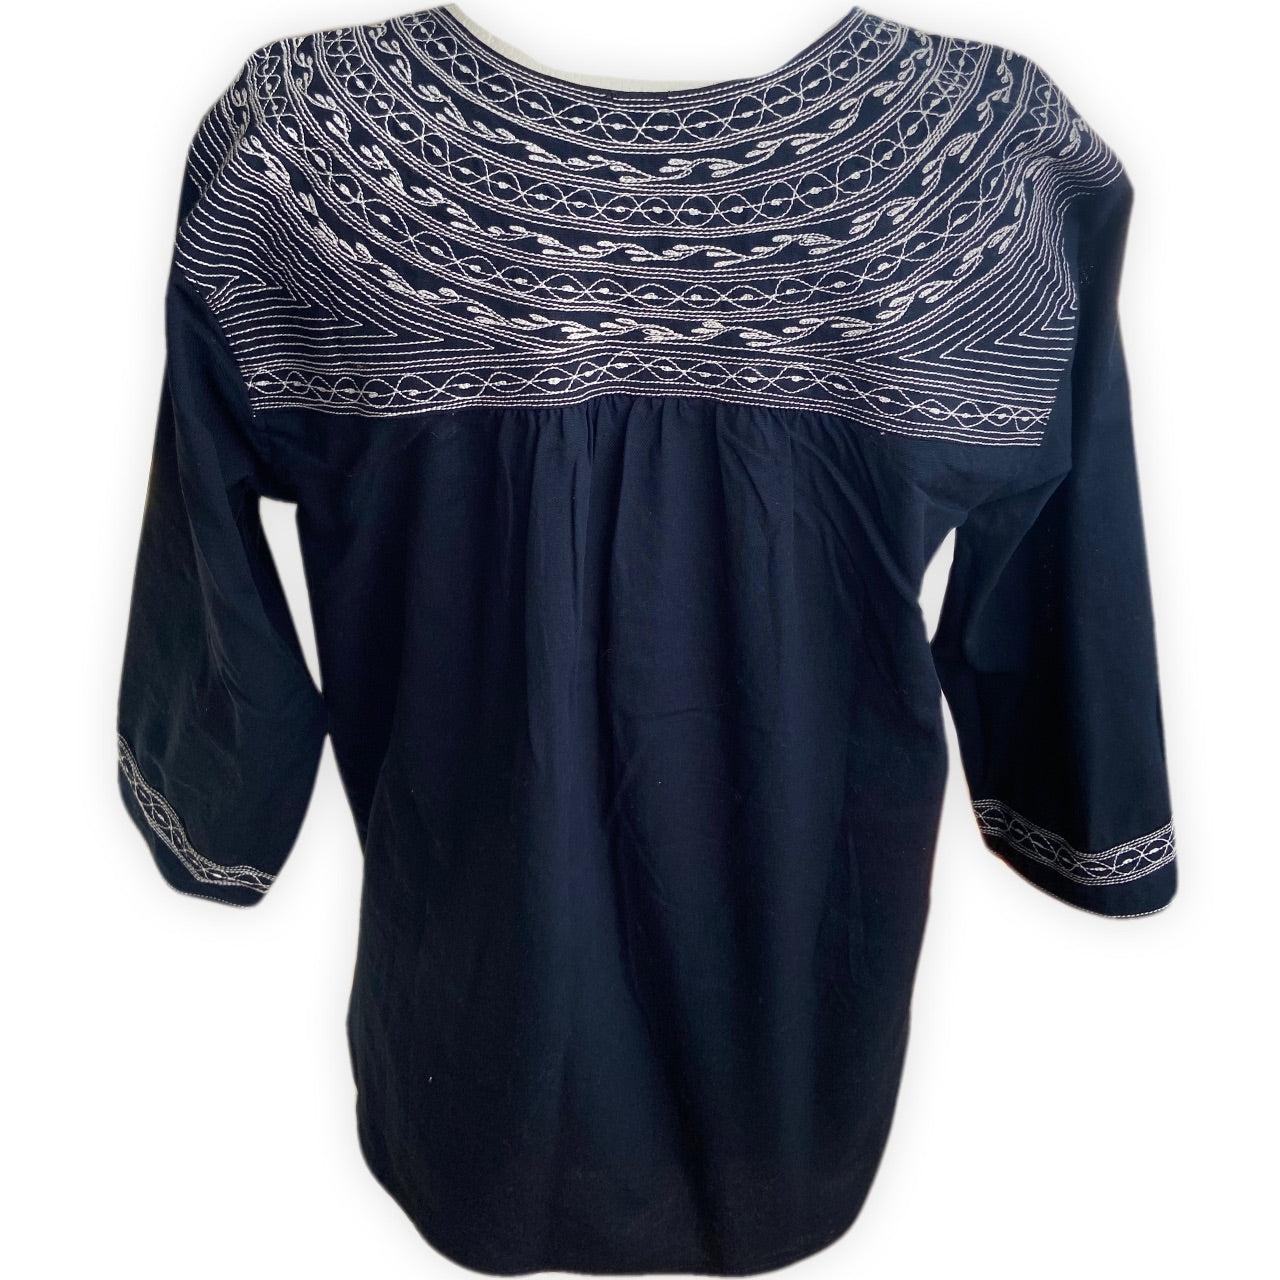 Oaxacan artisan blouse navy blue with embroidery in silver